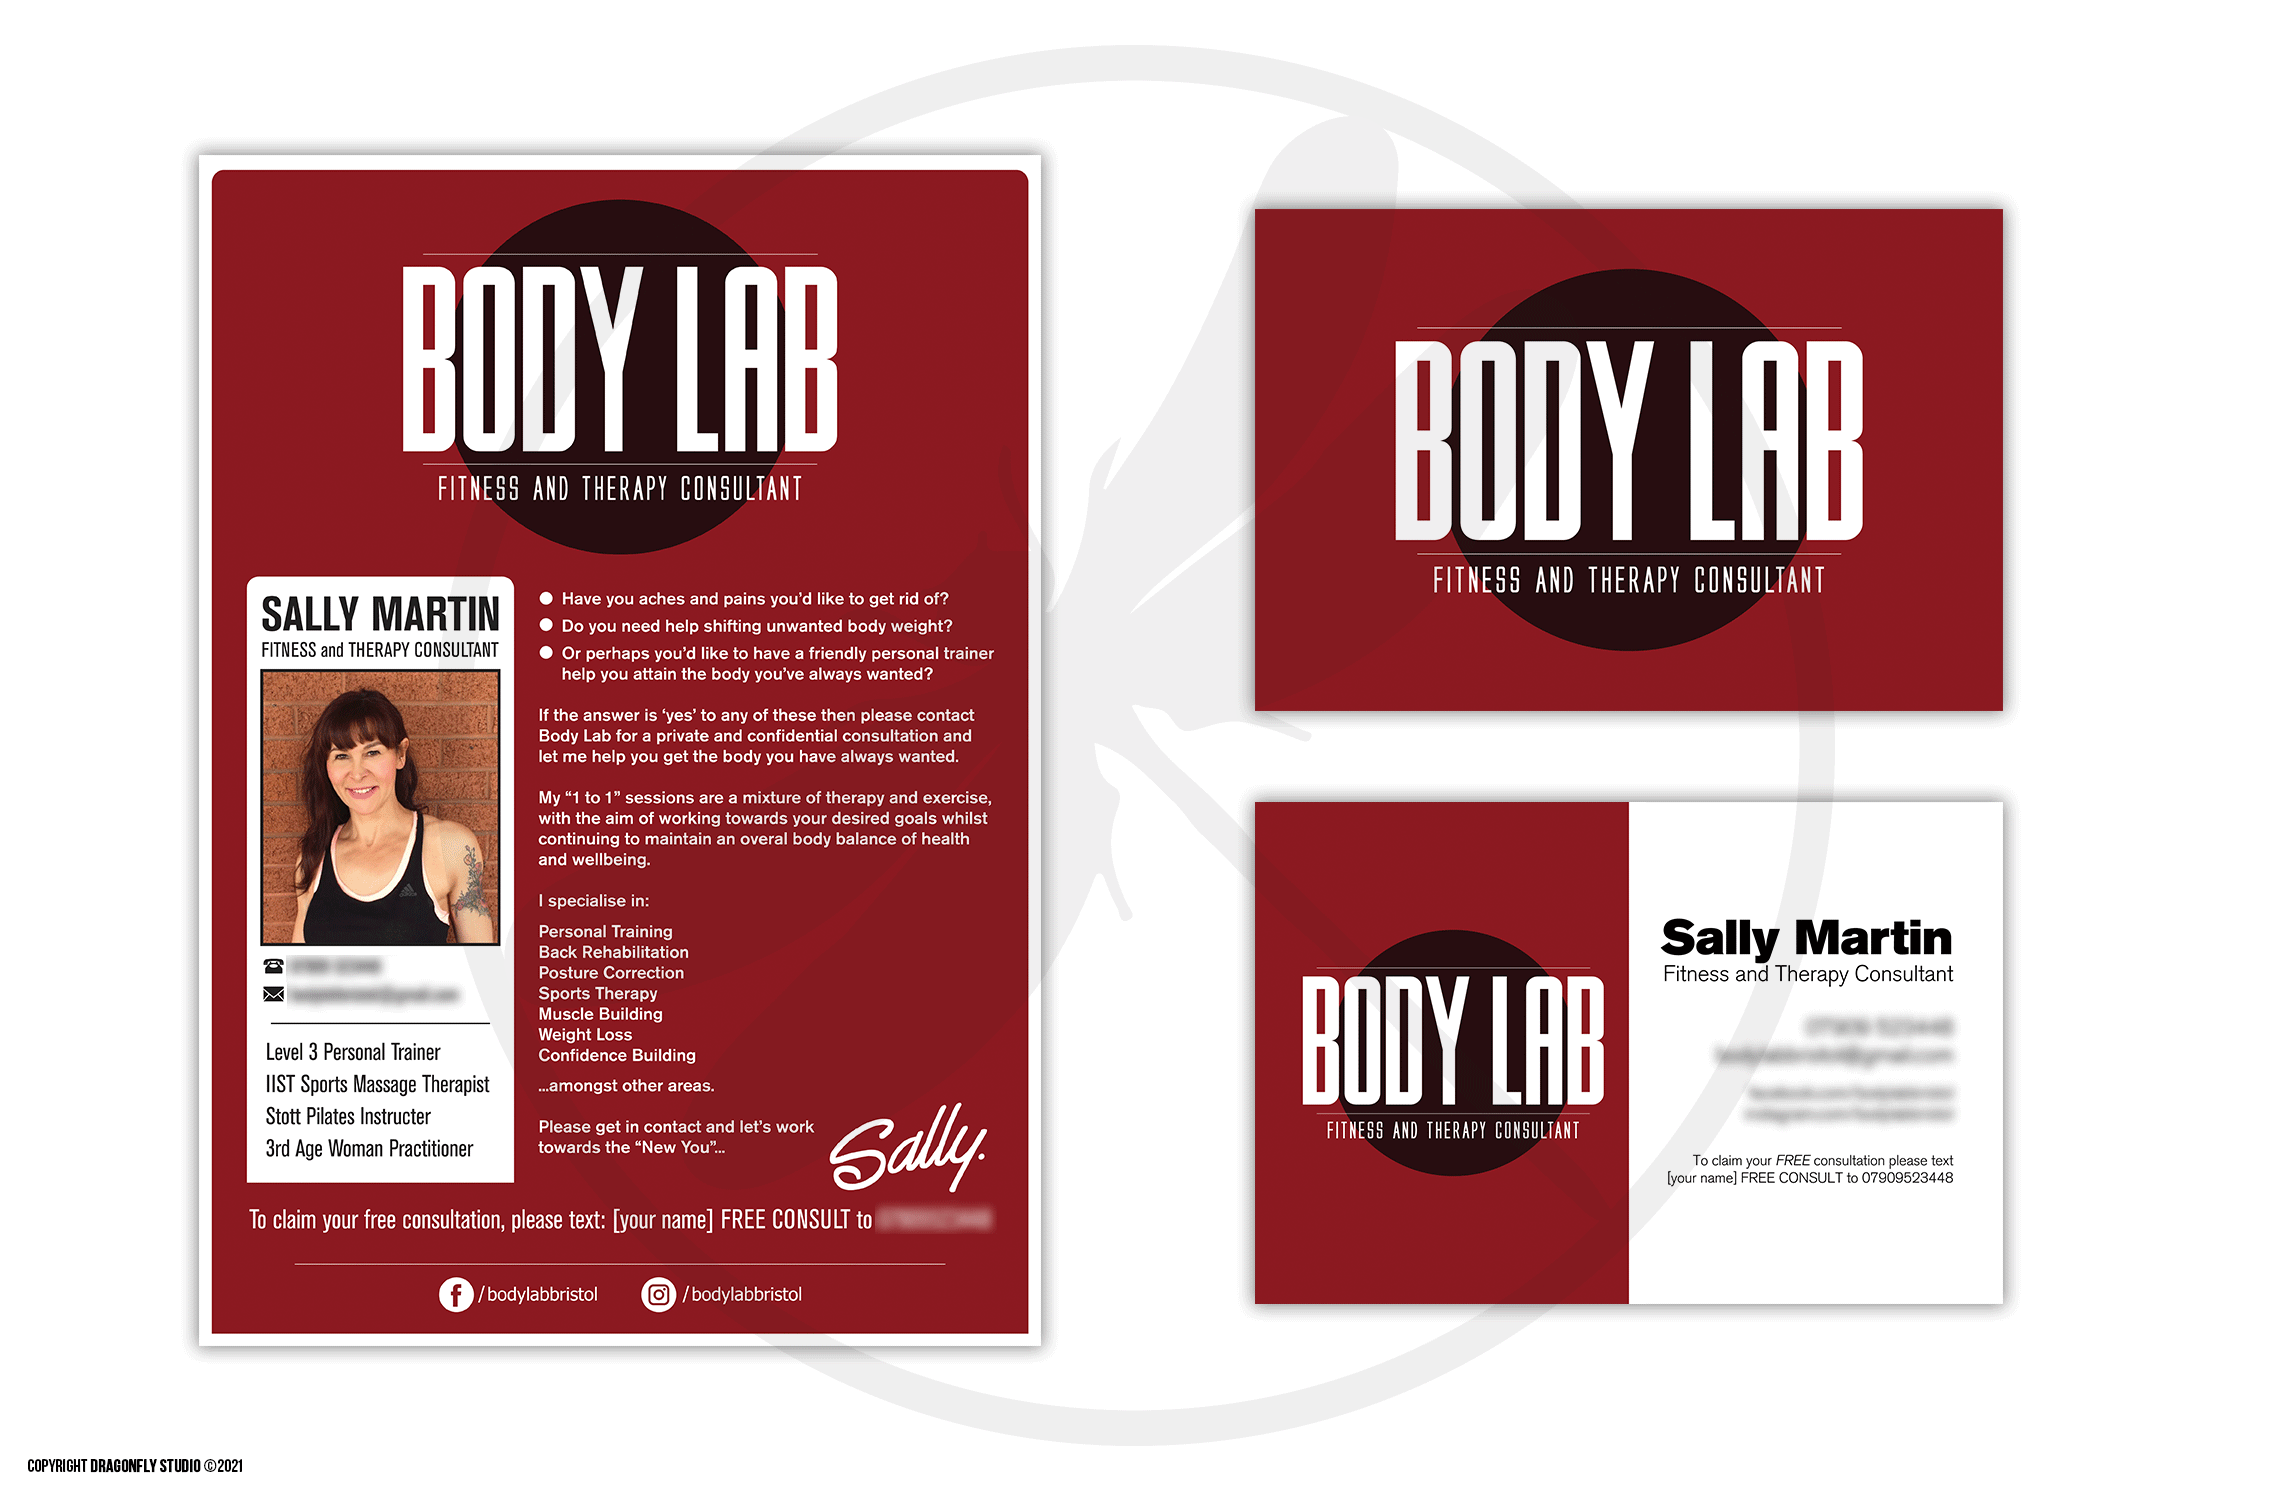 Body Lab - Branding & Promotional Material